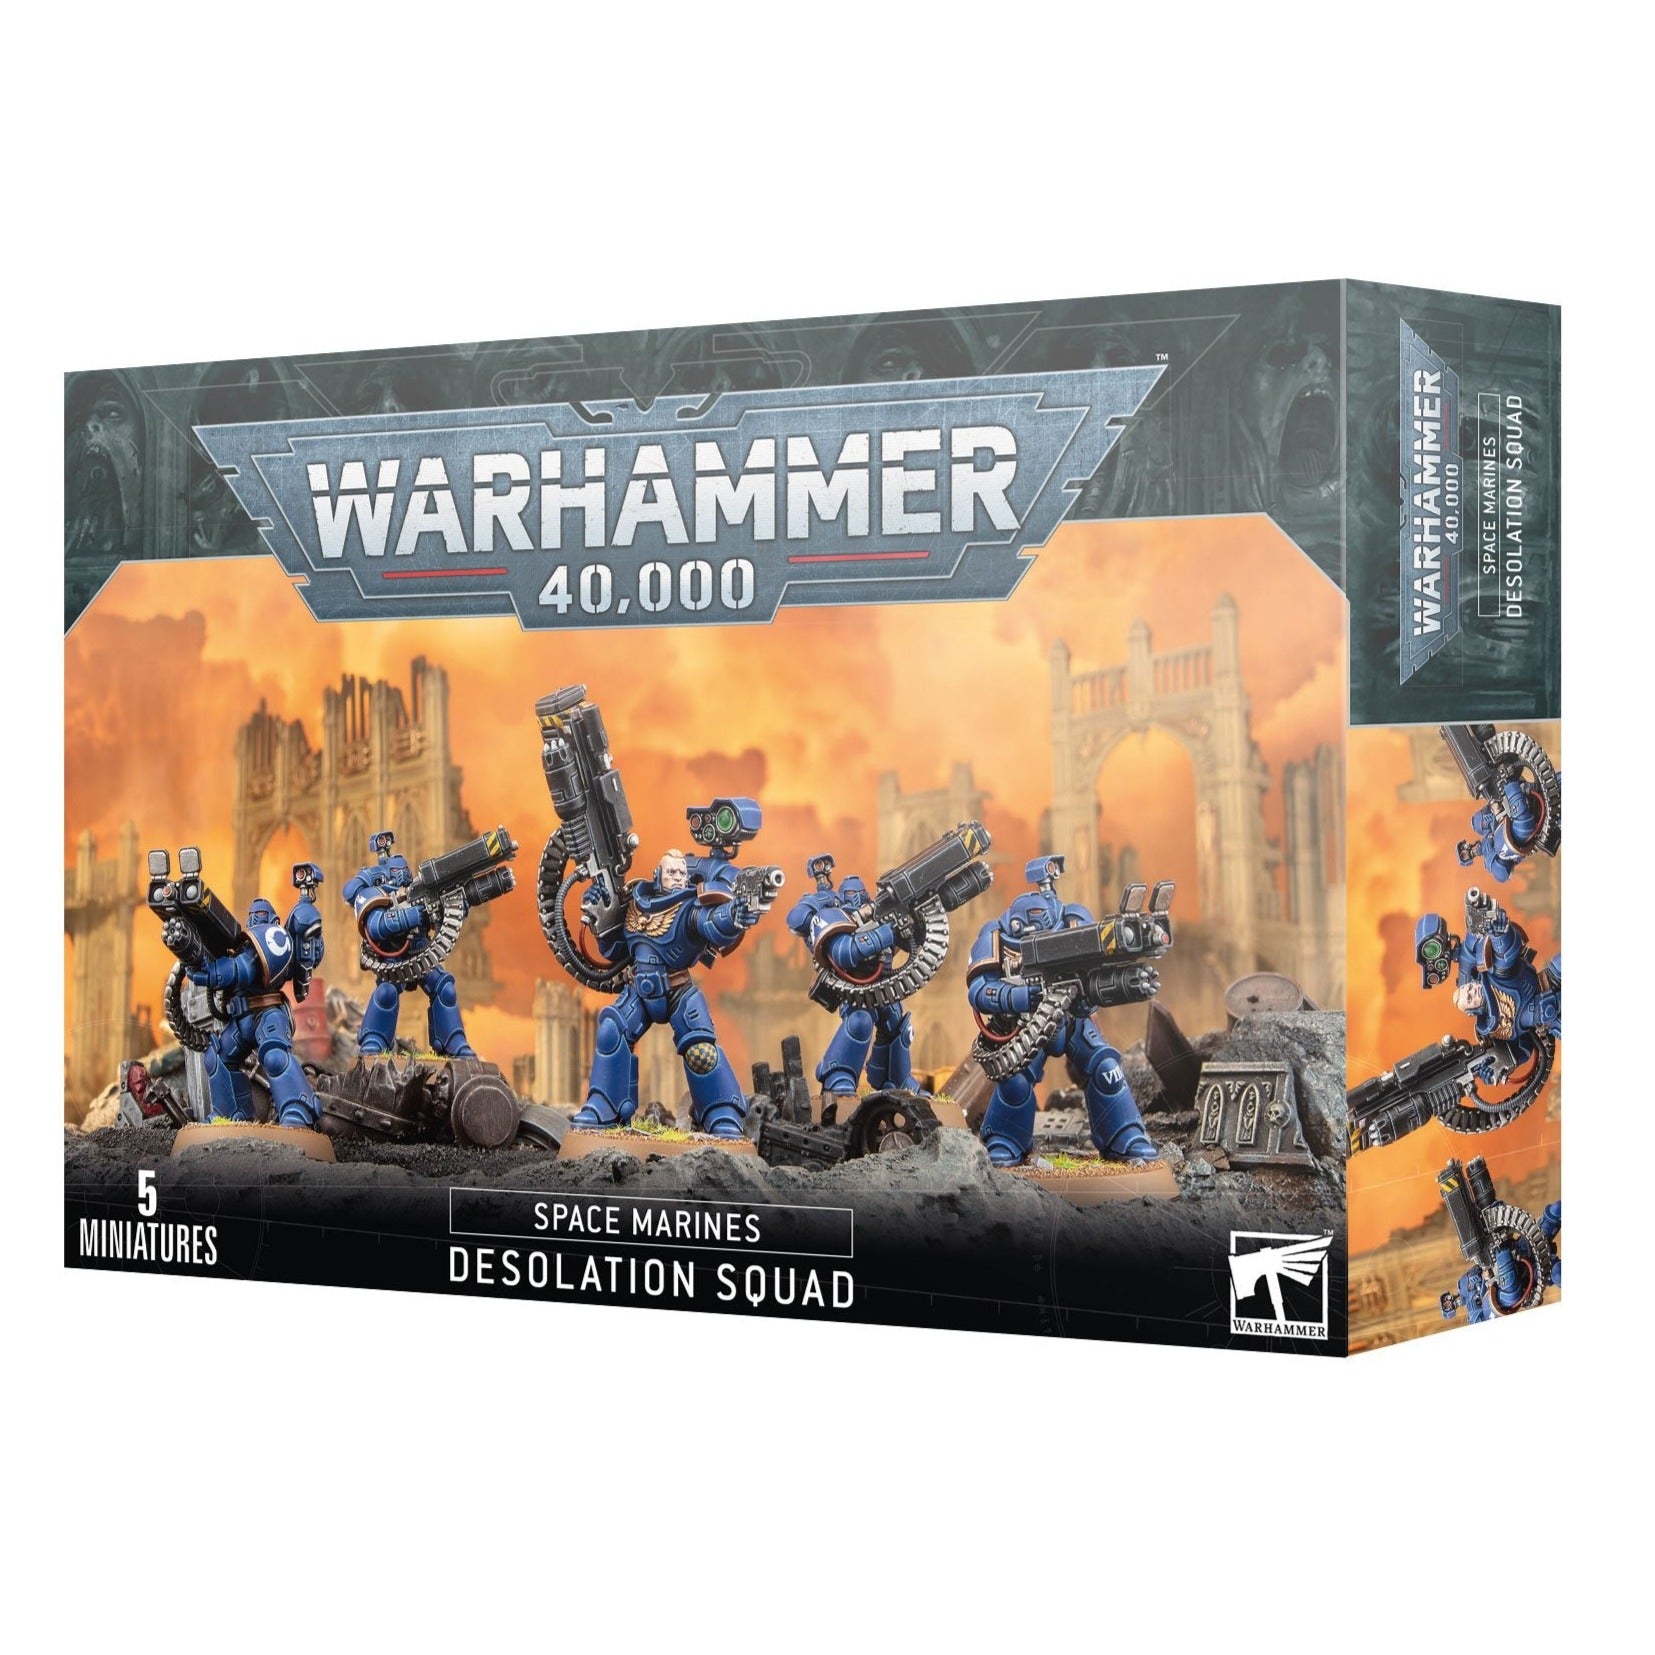 Space Marines: Desolation Squad - Release Date 14/10/23 - Loaded Dice Barry Vale of Glamorgan CF64 3HD